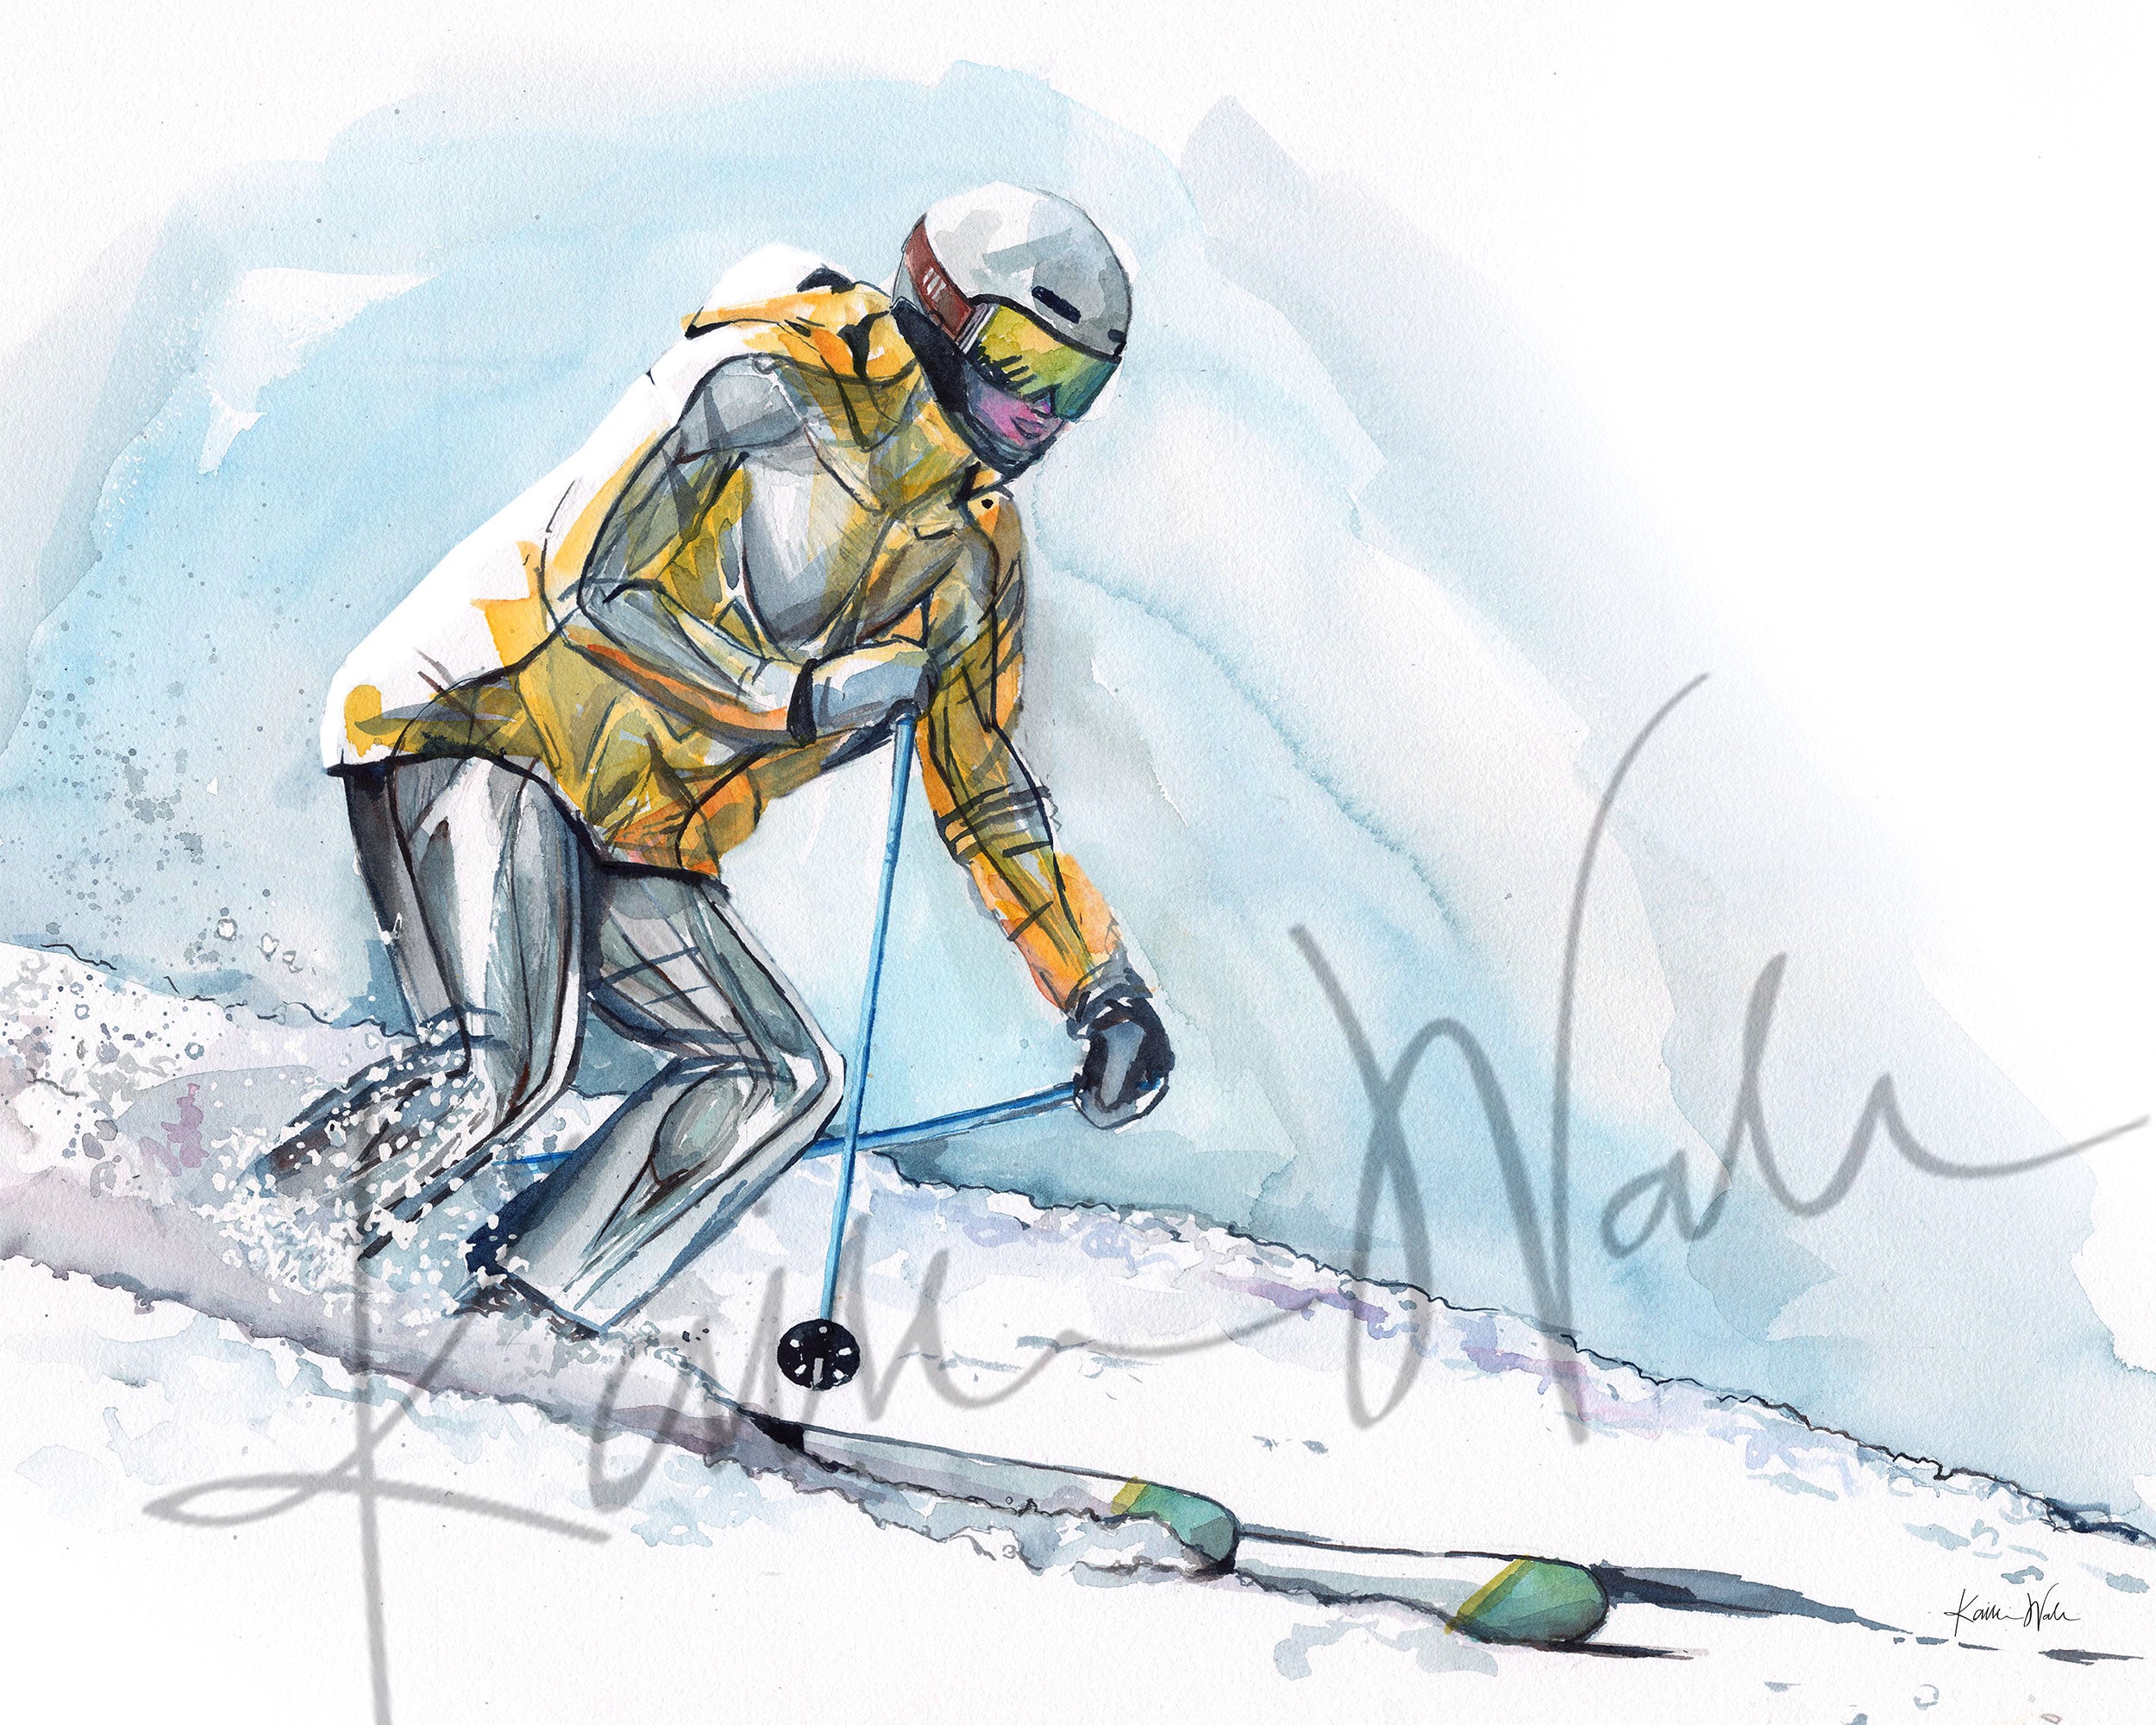 Unframed watercolor painting of a skier going down a ski hill with their muscle anatomy showing under their clothing. 